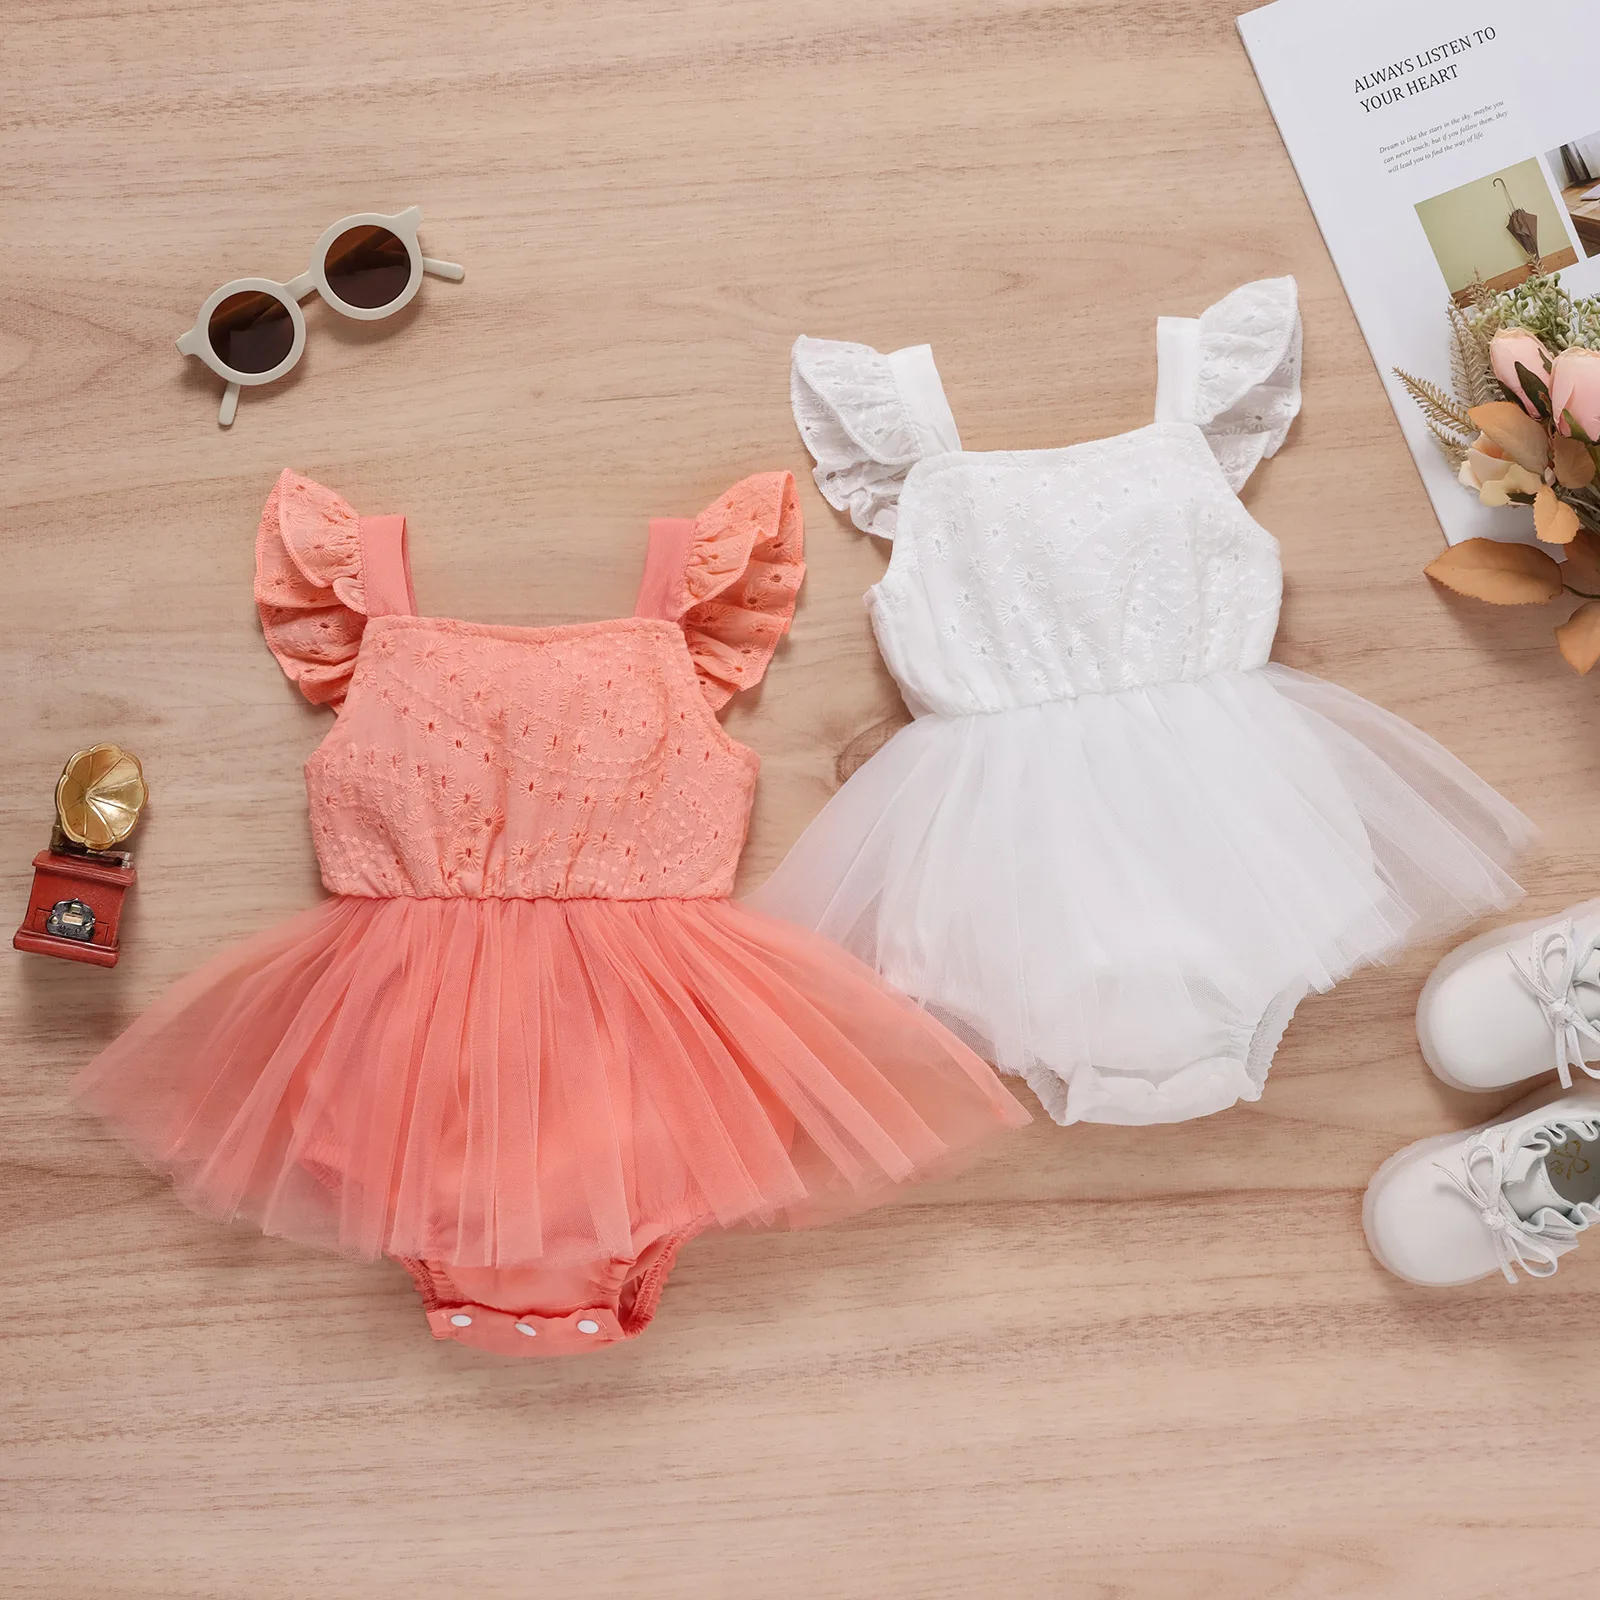 Infant Baby Girls Summer Romper Flying Sleeve Cut-Out Embroidered Mesh Skirt Triangle-Bottom Jumpsuit Newborn Cute Clothes 0-24M